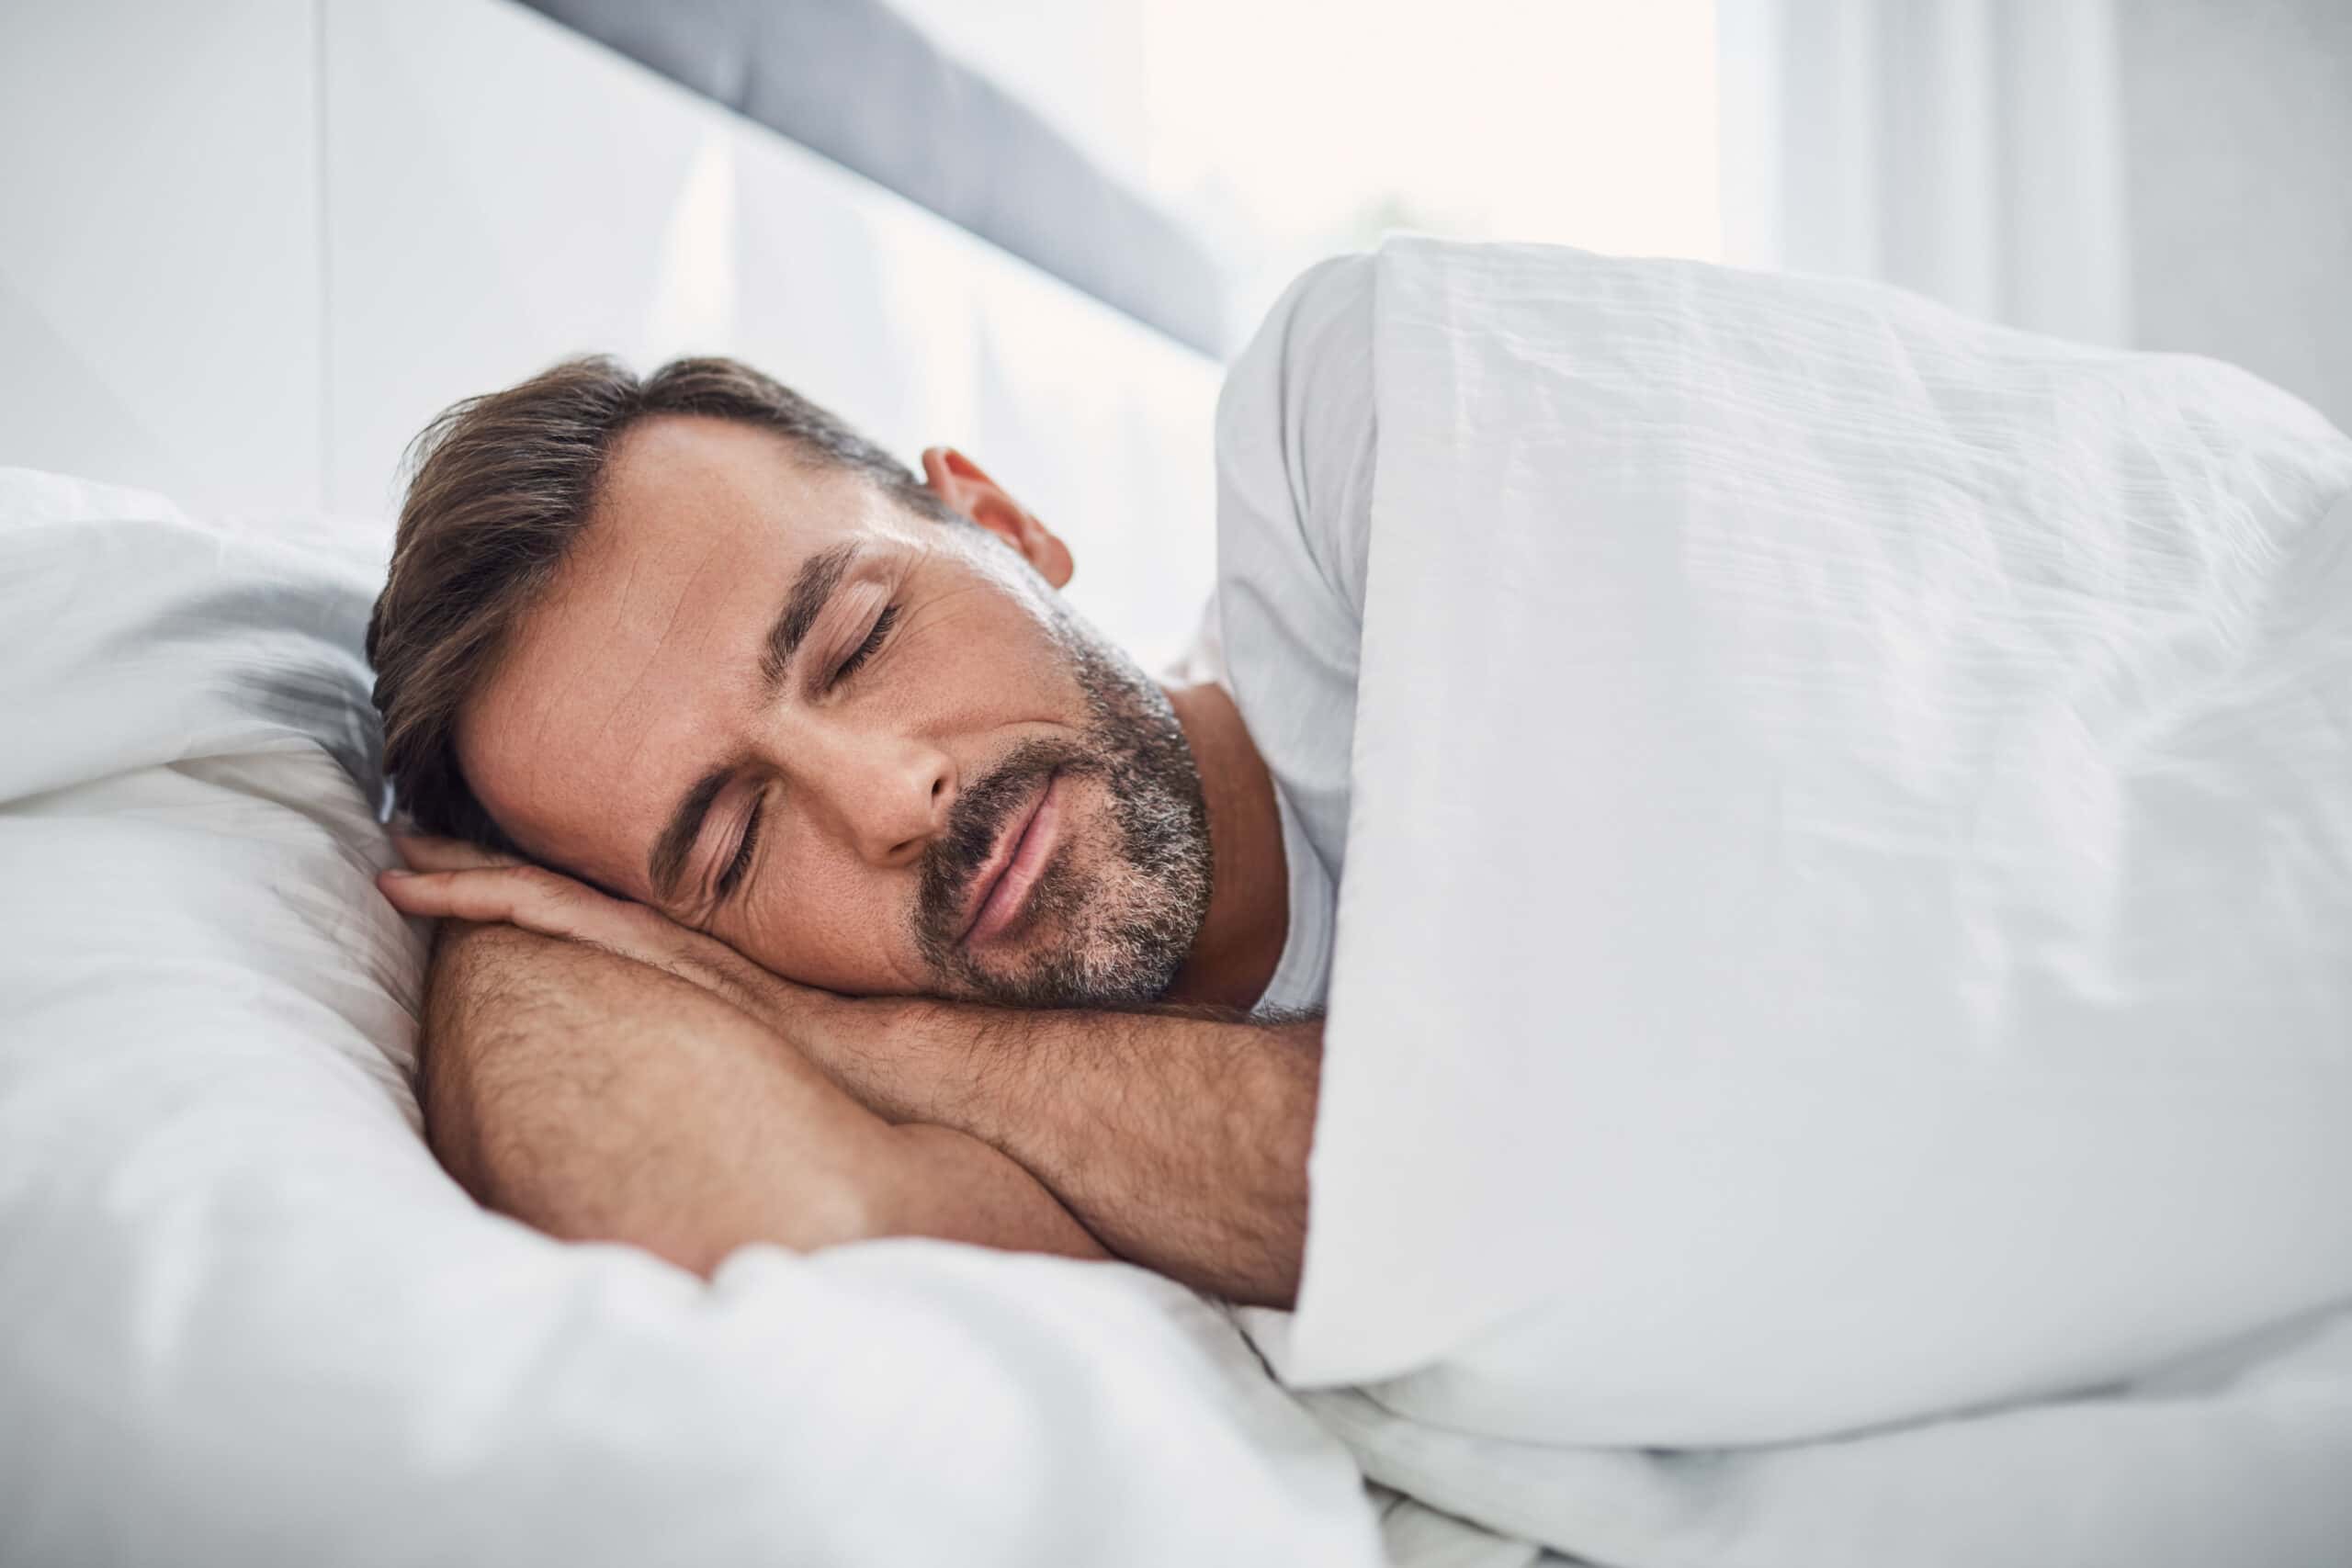 How to sleep after a hair transplant?